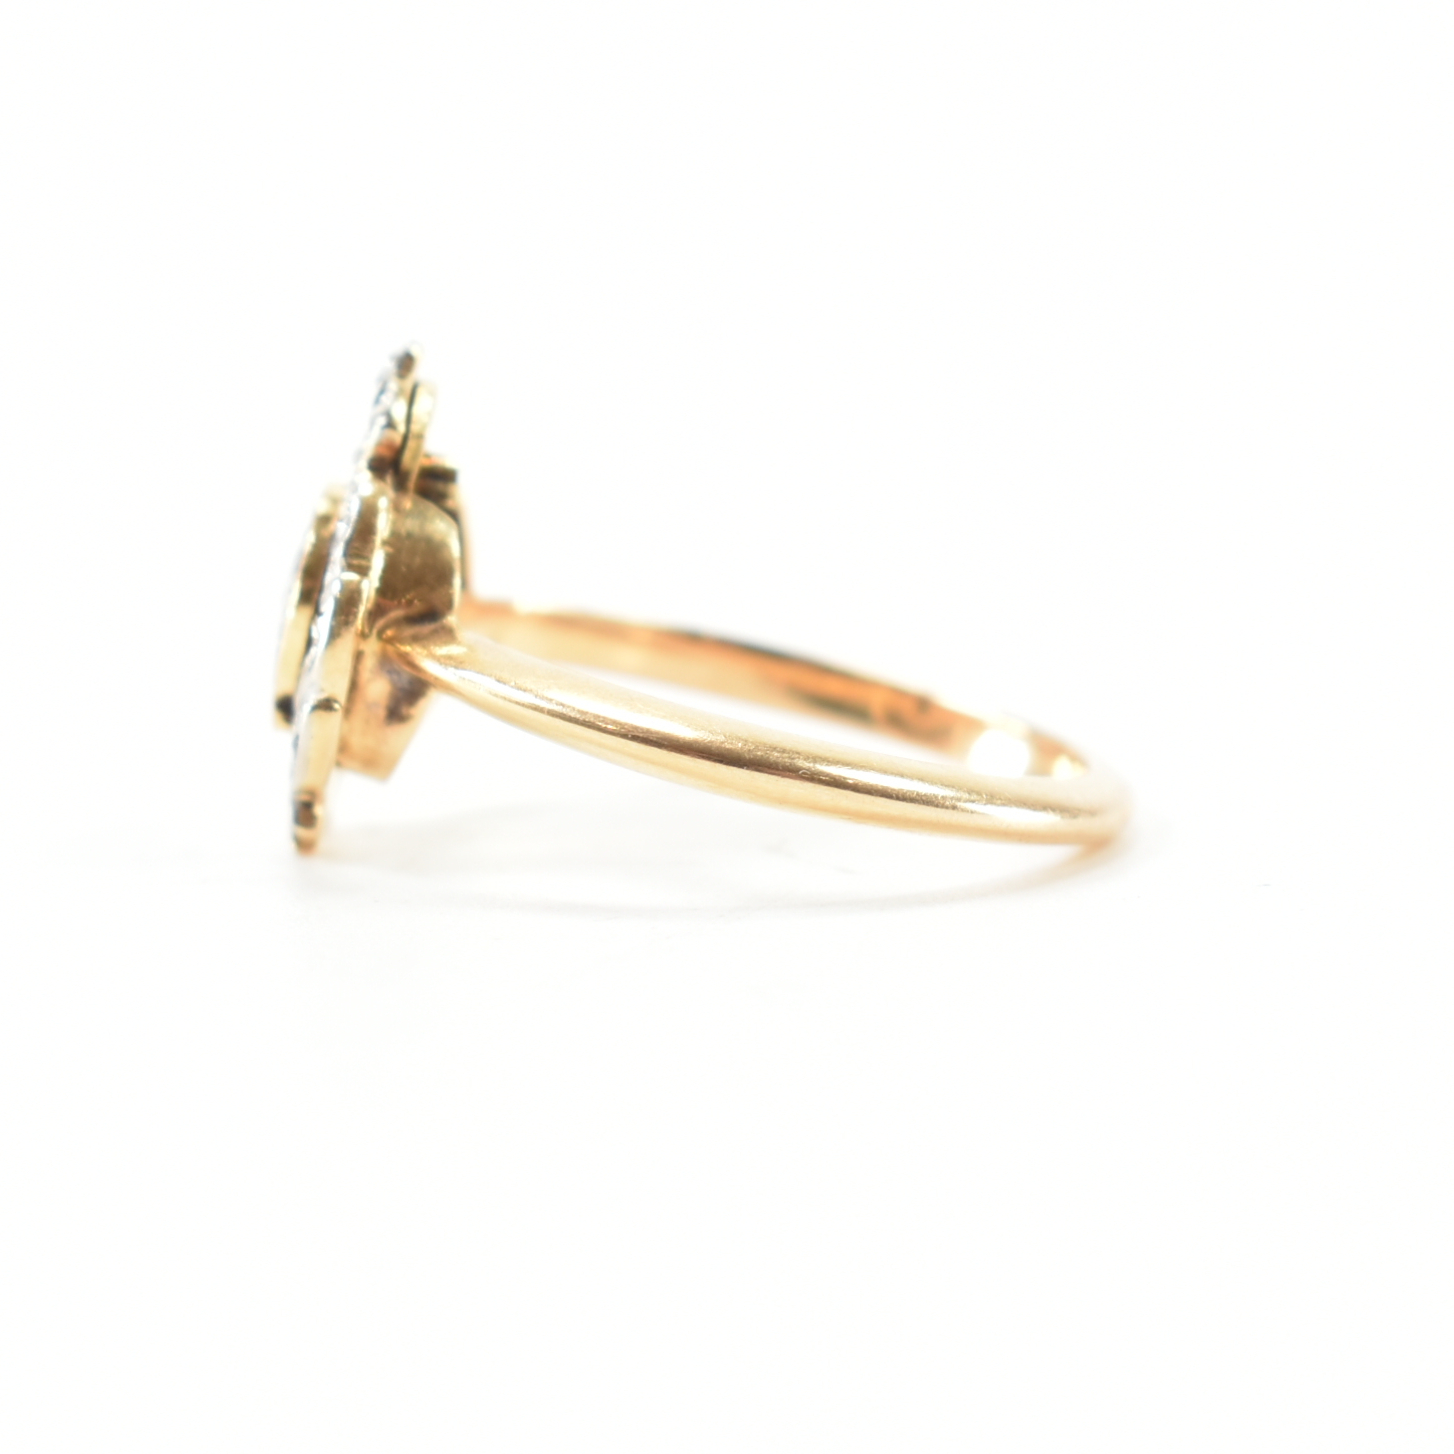 GEORGE VI GOLD & DIAMOND MILITARY SWEETHEART RING - Image 2 of 7